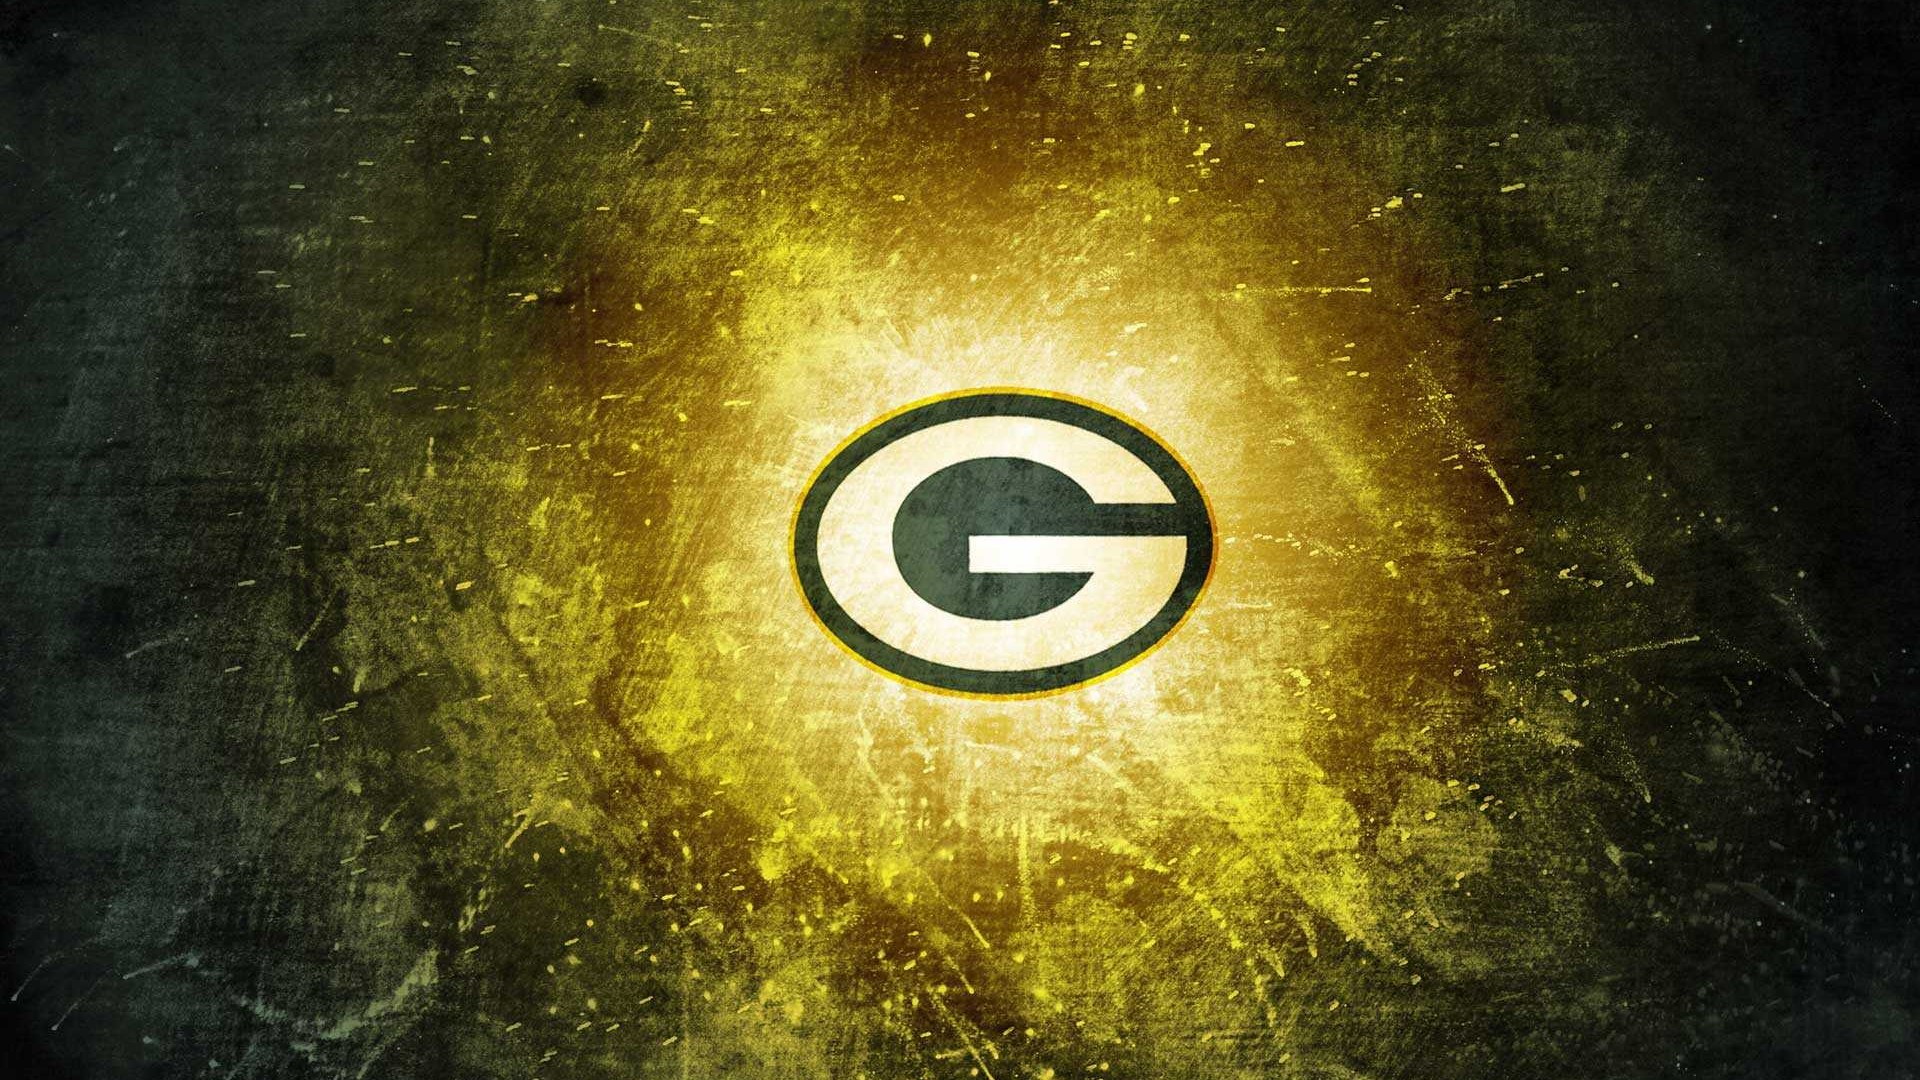 Green Bay Packers Wallpaper HD with high-resolution 1920x1080 pixel. You can use and set as wallpaper for Notebook Screensavers, Mac Wallpapers, Mobile Home Screen, iPhone or Android Phones Lock Screen